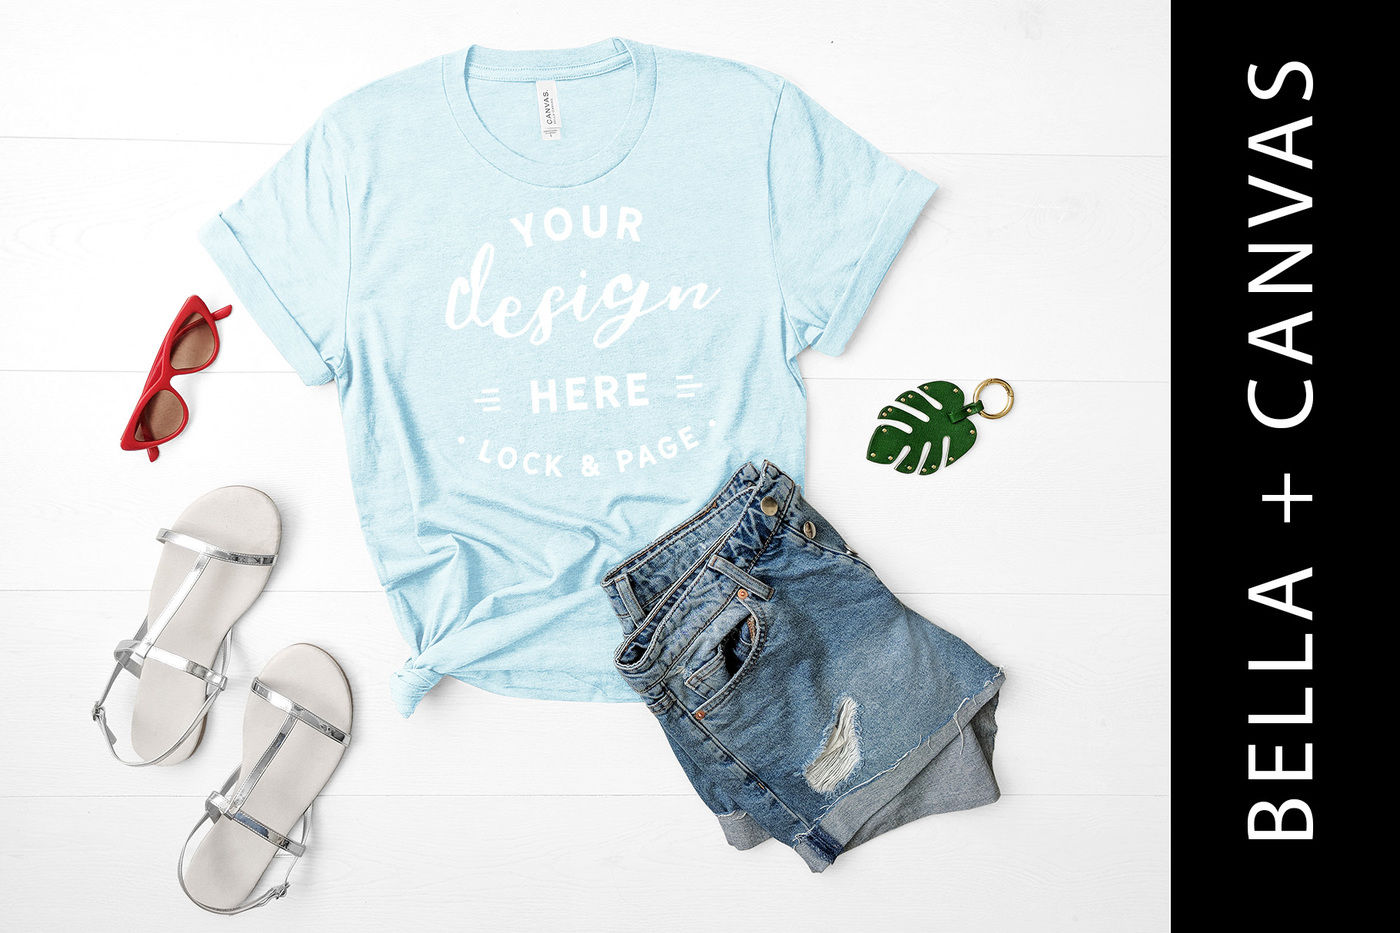 Bella Canvas 3001 Mockup Styled Flat Lay Bella Canvas Heather Prism Ice Blue Shirt Mockup Tied T Shirt Mockup Hanging T Shirt Mockup